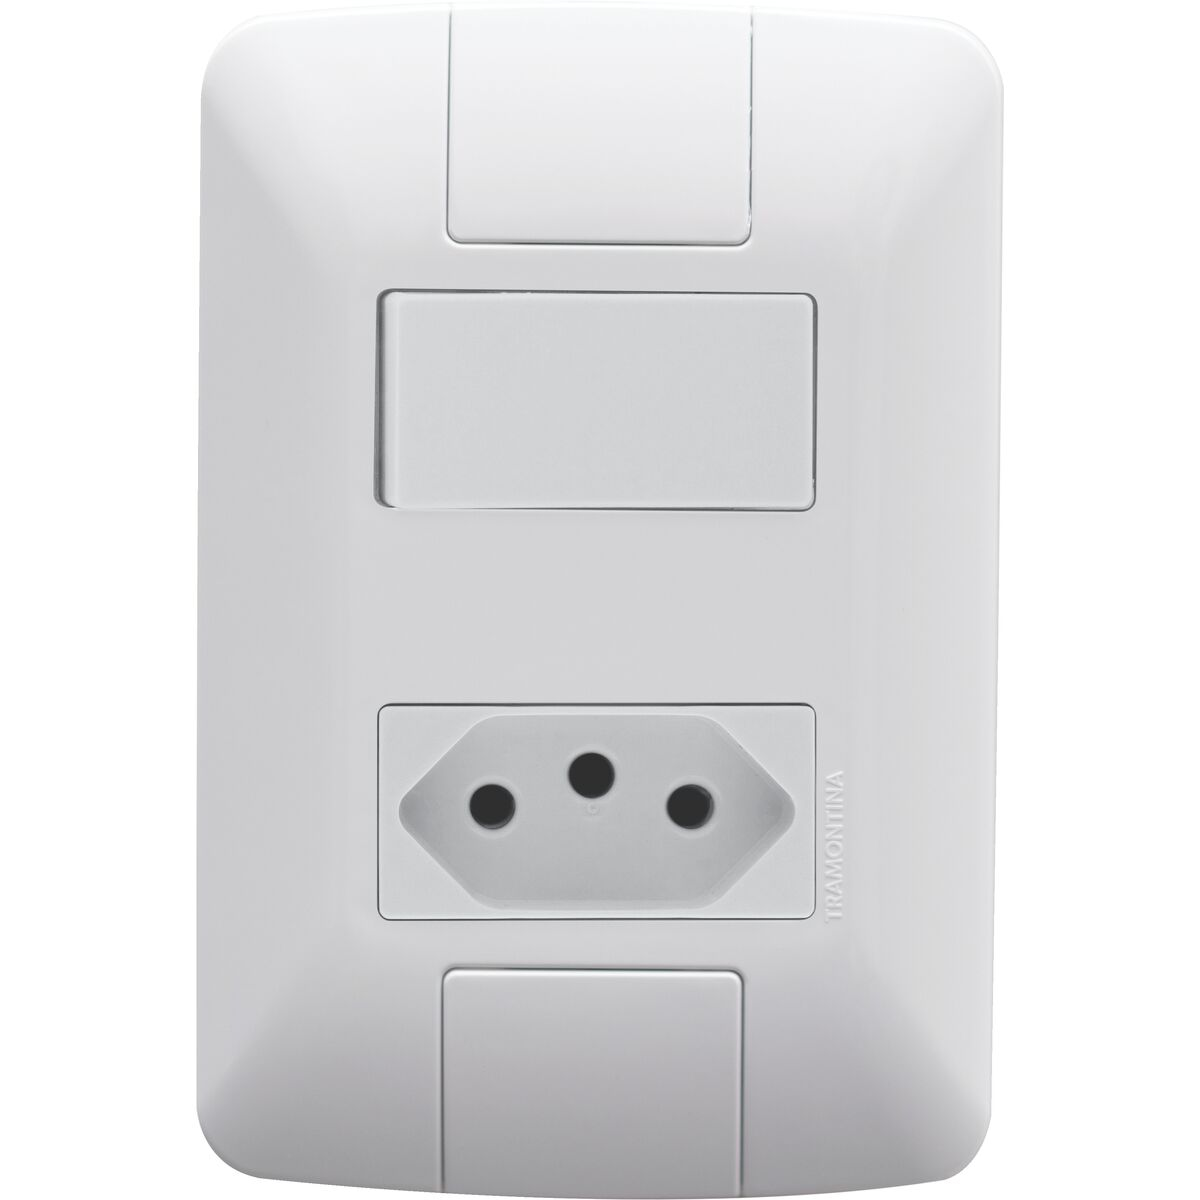 Tramontina Aria white 4x2 set with 1 single-pole switch, 6 A and 250 V, and 1 2P+T outlet, 20 A and 250 V